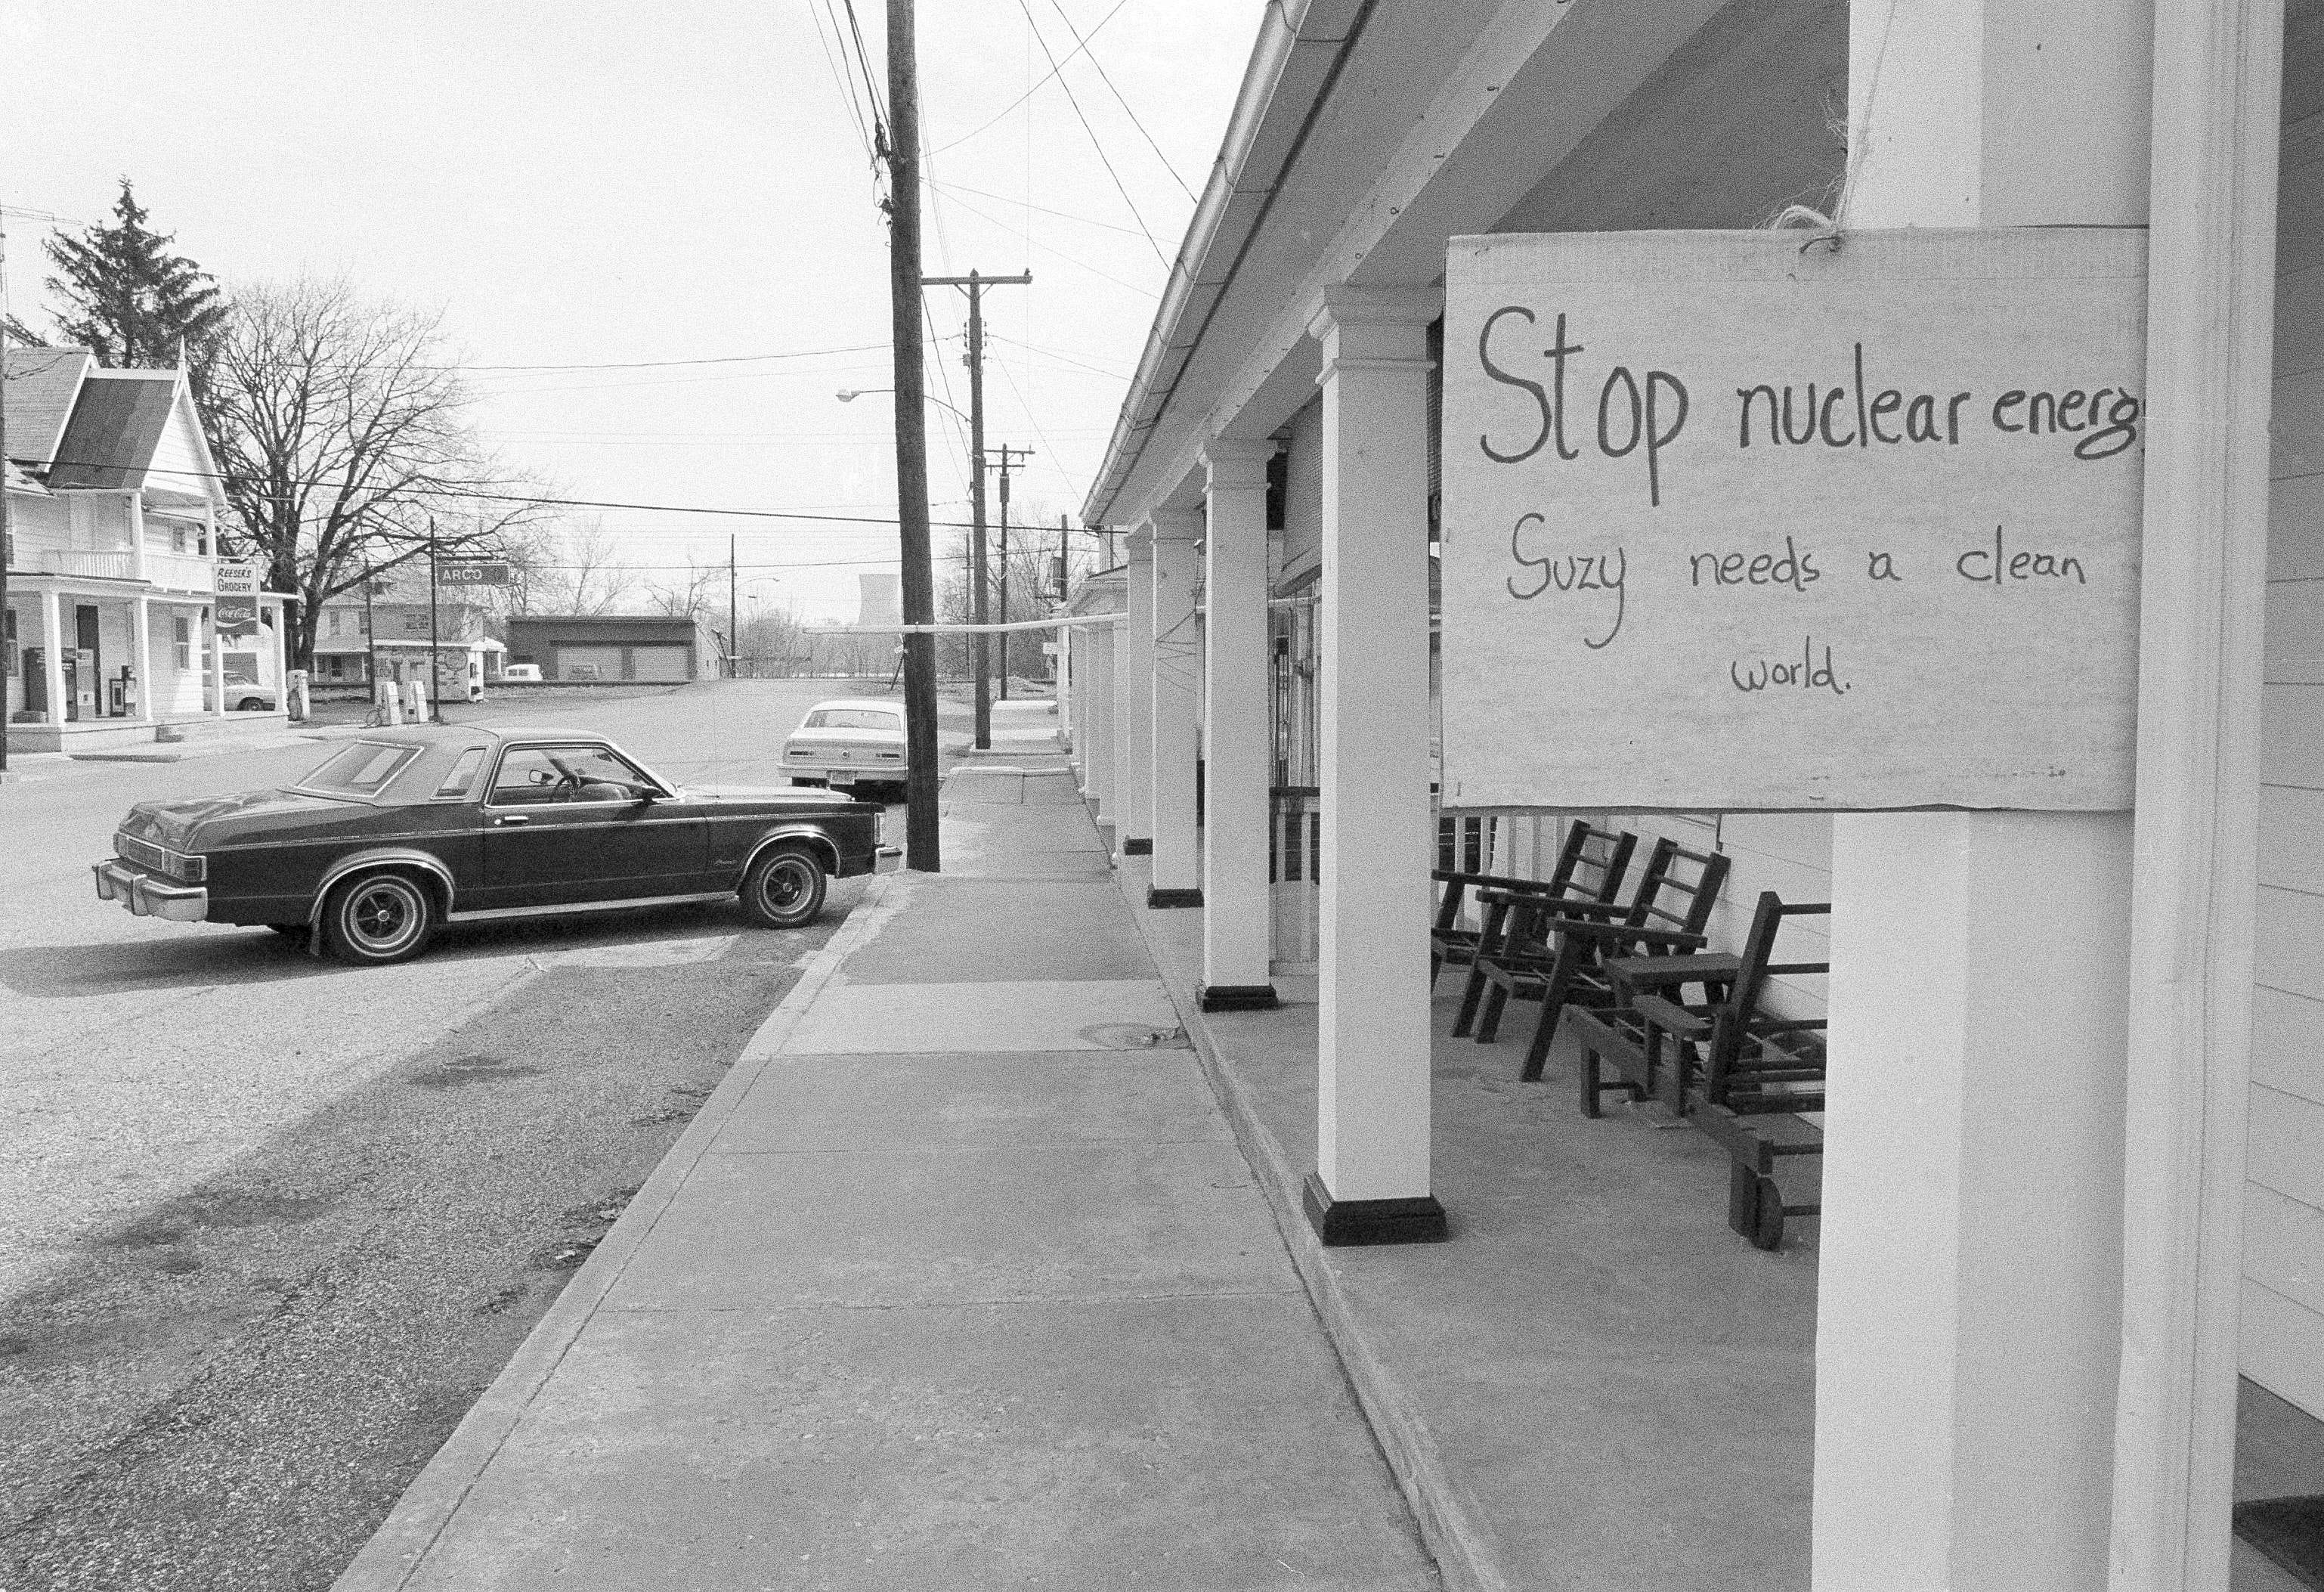 A sign on a building in Goldsboro, Penn, with a deserted street and nuclear plant cooling towers in the background was the scene here, March 31, 1979. Many of the residents within a five-mile area have evacuated. (AP Photo/R.C. Greenawalt)